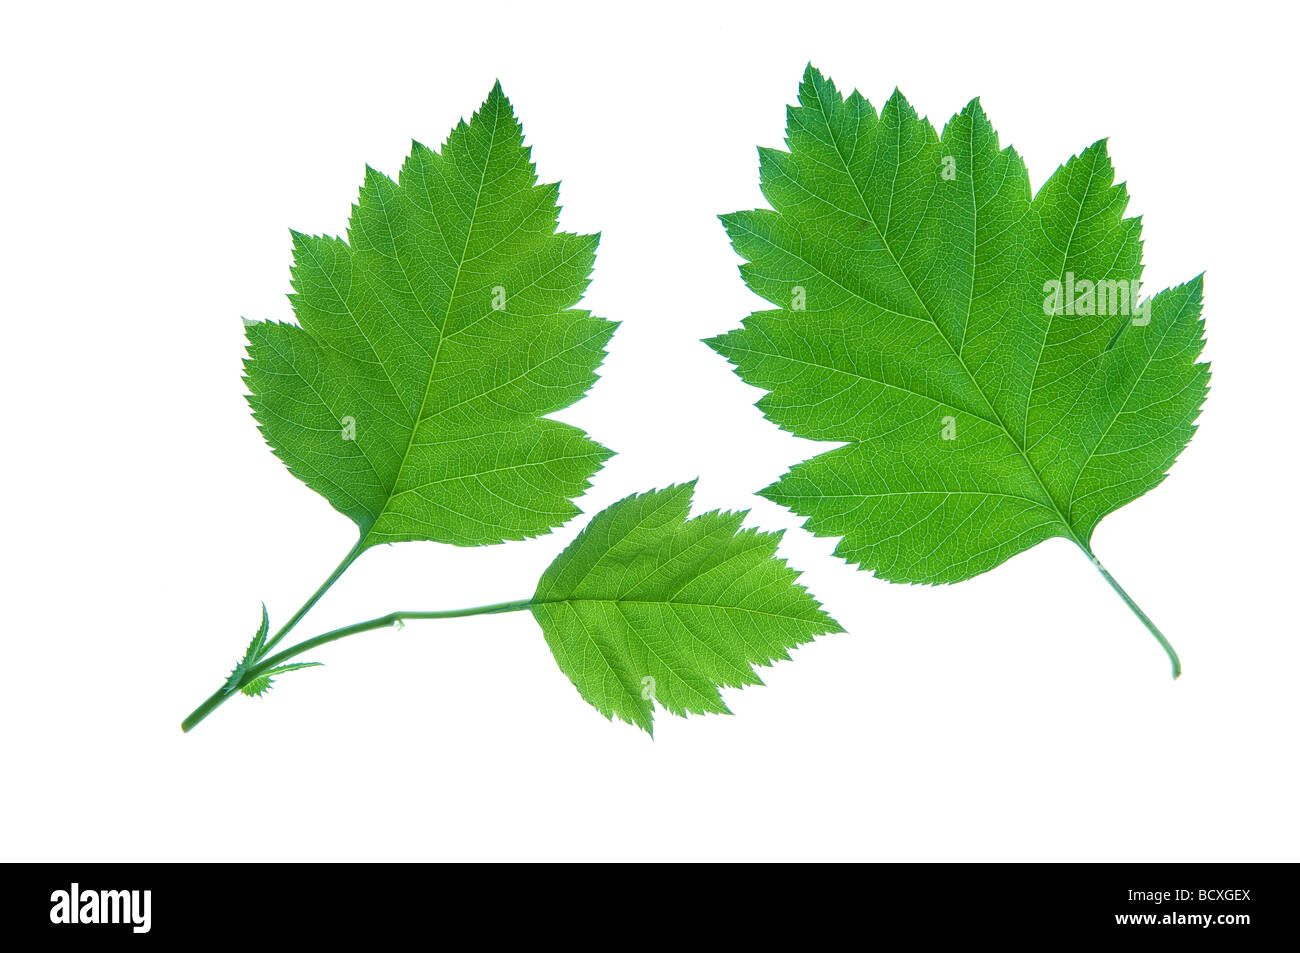 Feuilles vertes isolated on white Banque D'Images